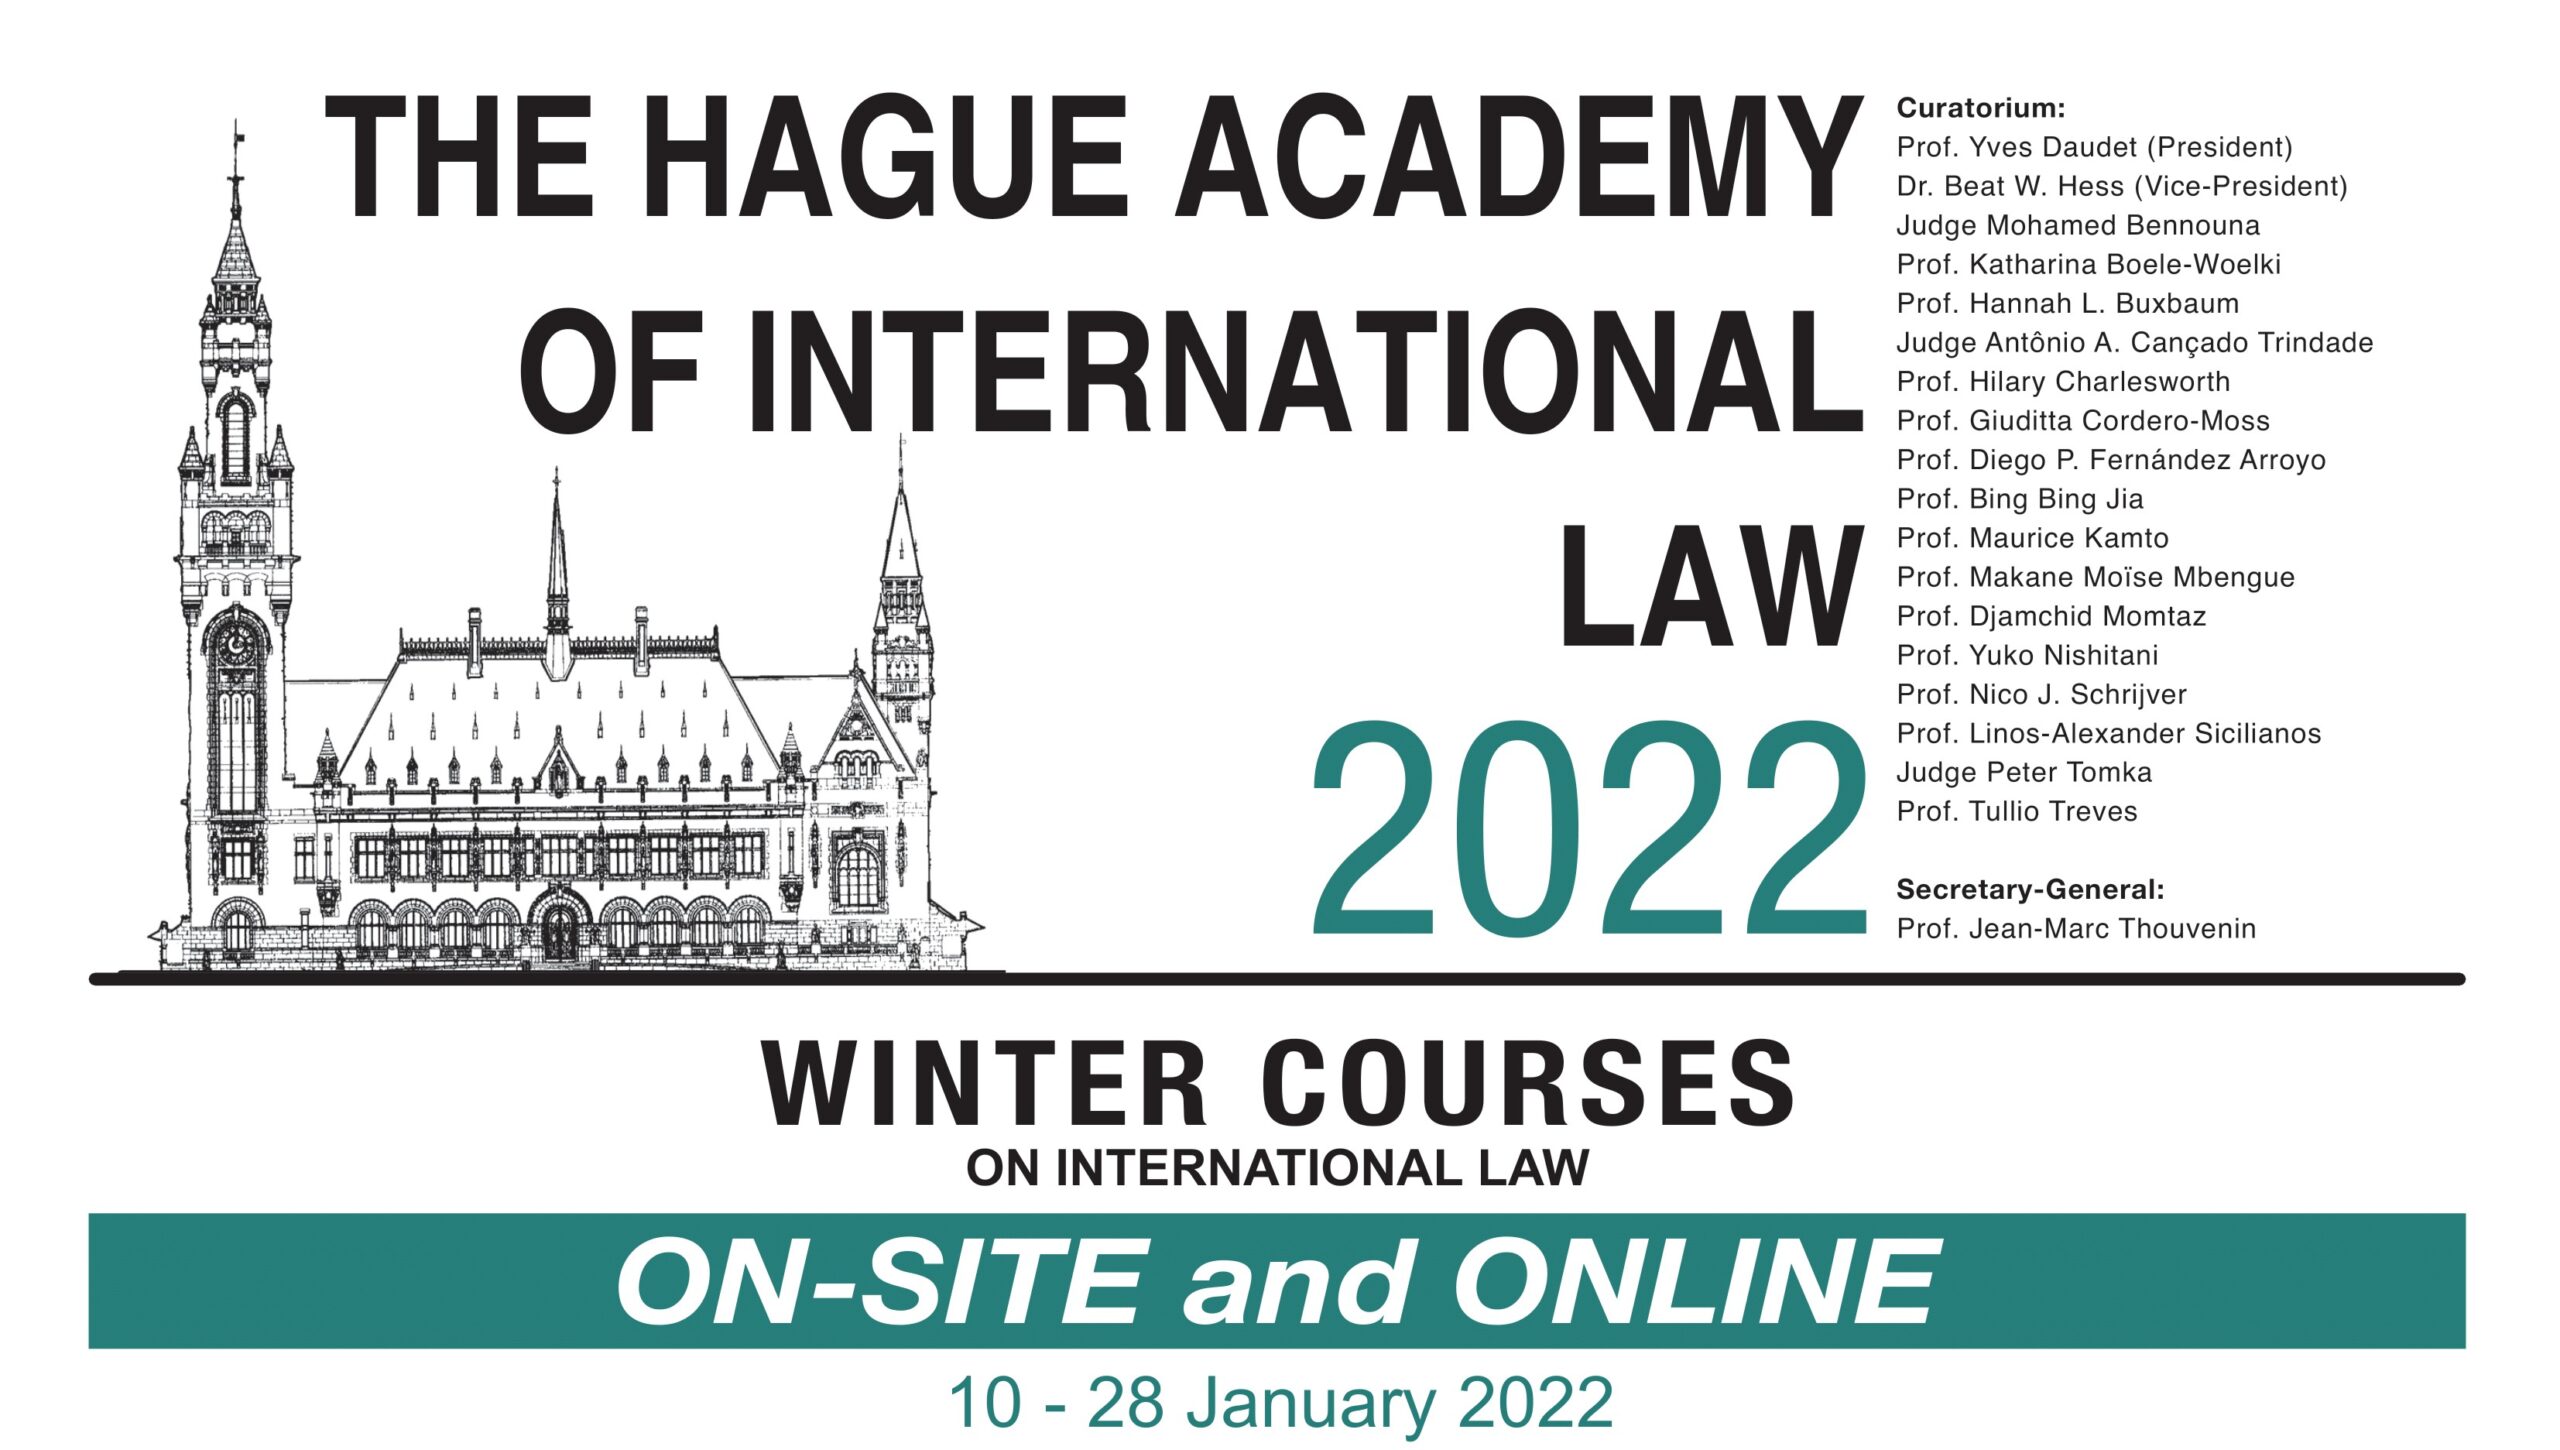 Full Grant for The Hague Academy of International Law – Winter 2022 Courses